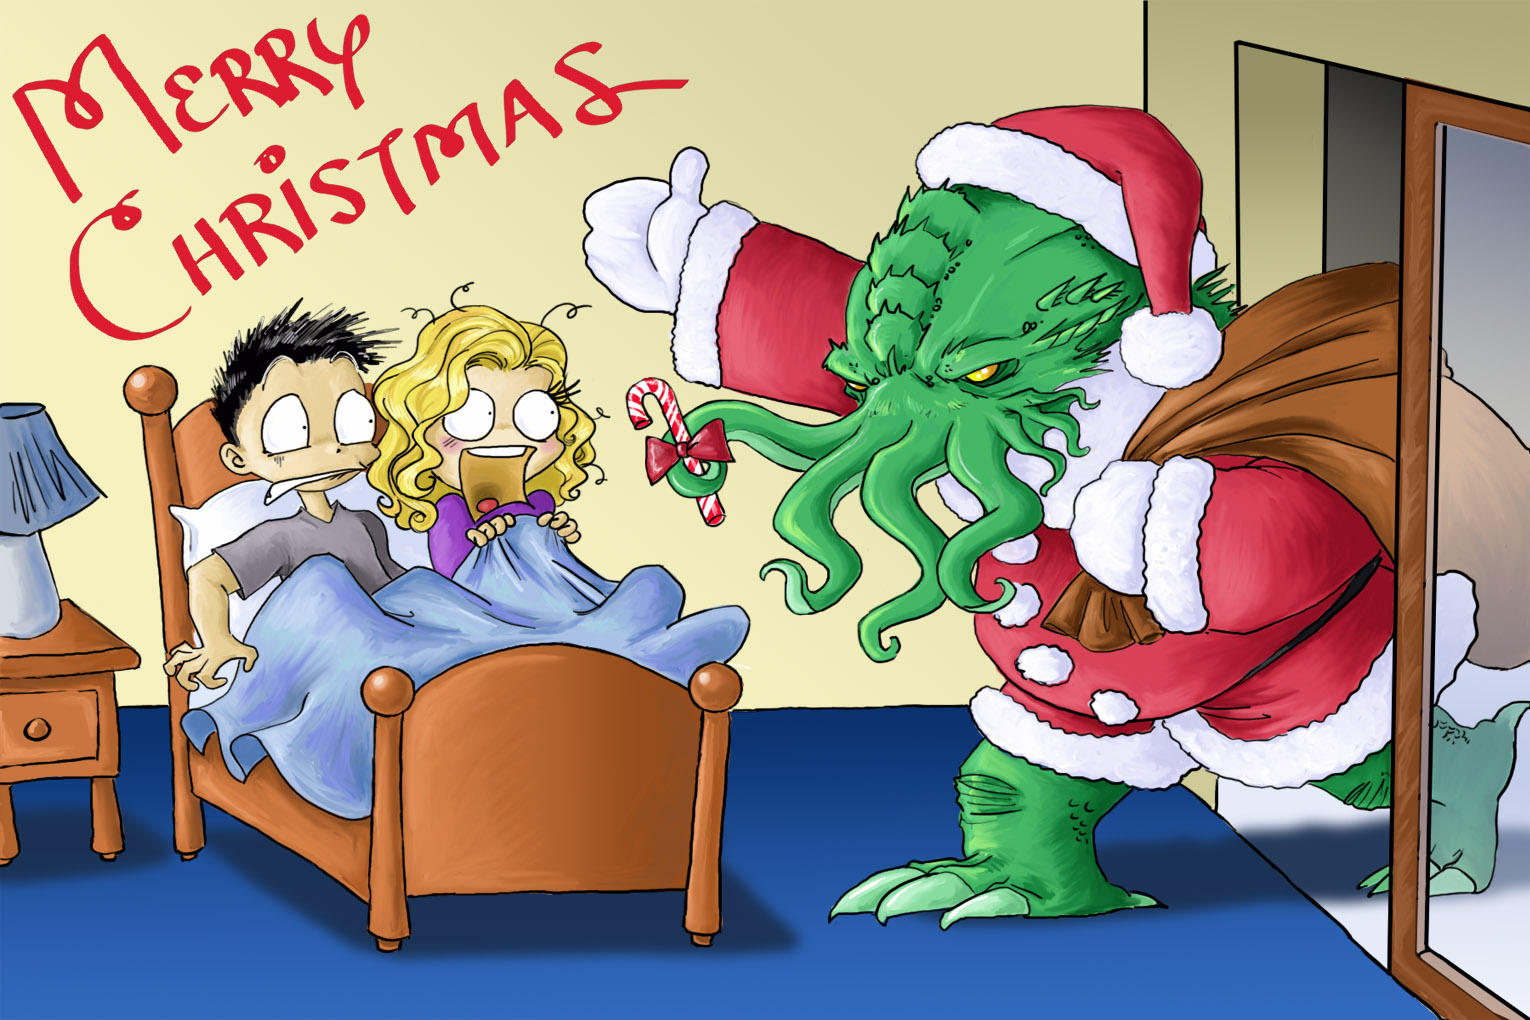 Santa_Cthulhu_Comes_to_Town_by_DrChrissy.jpg